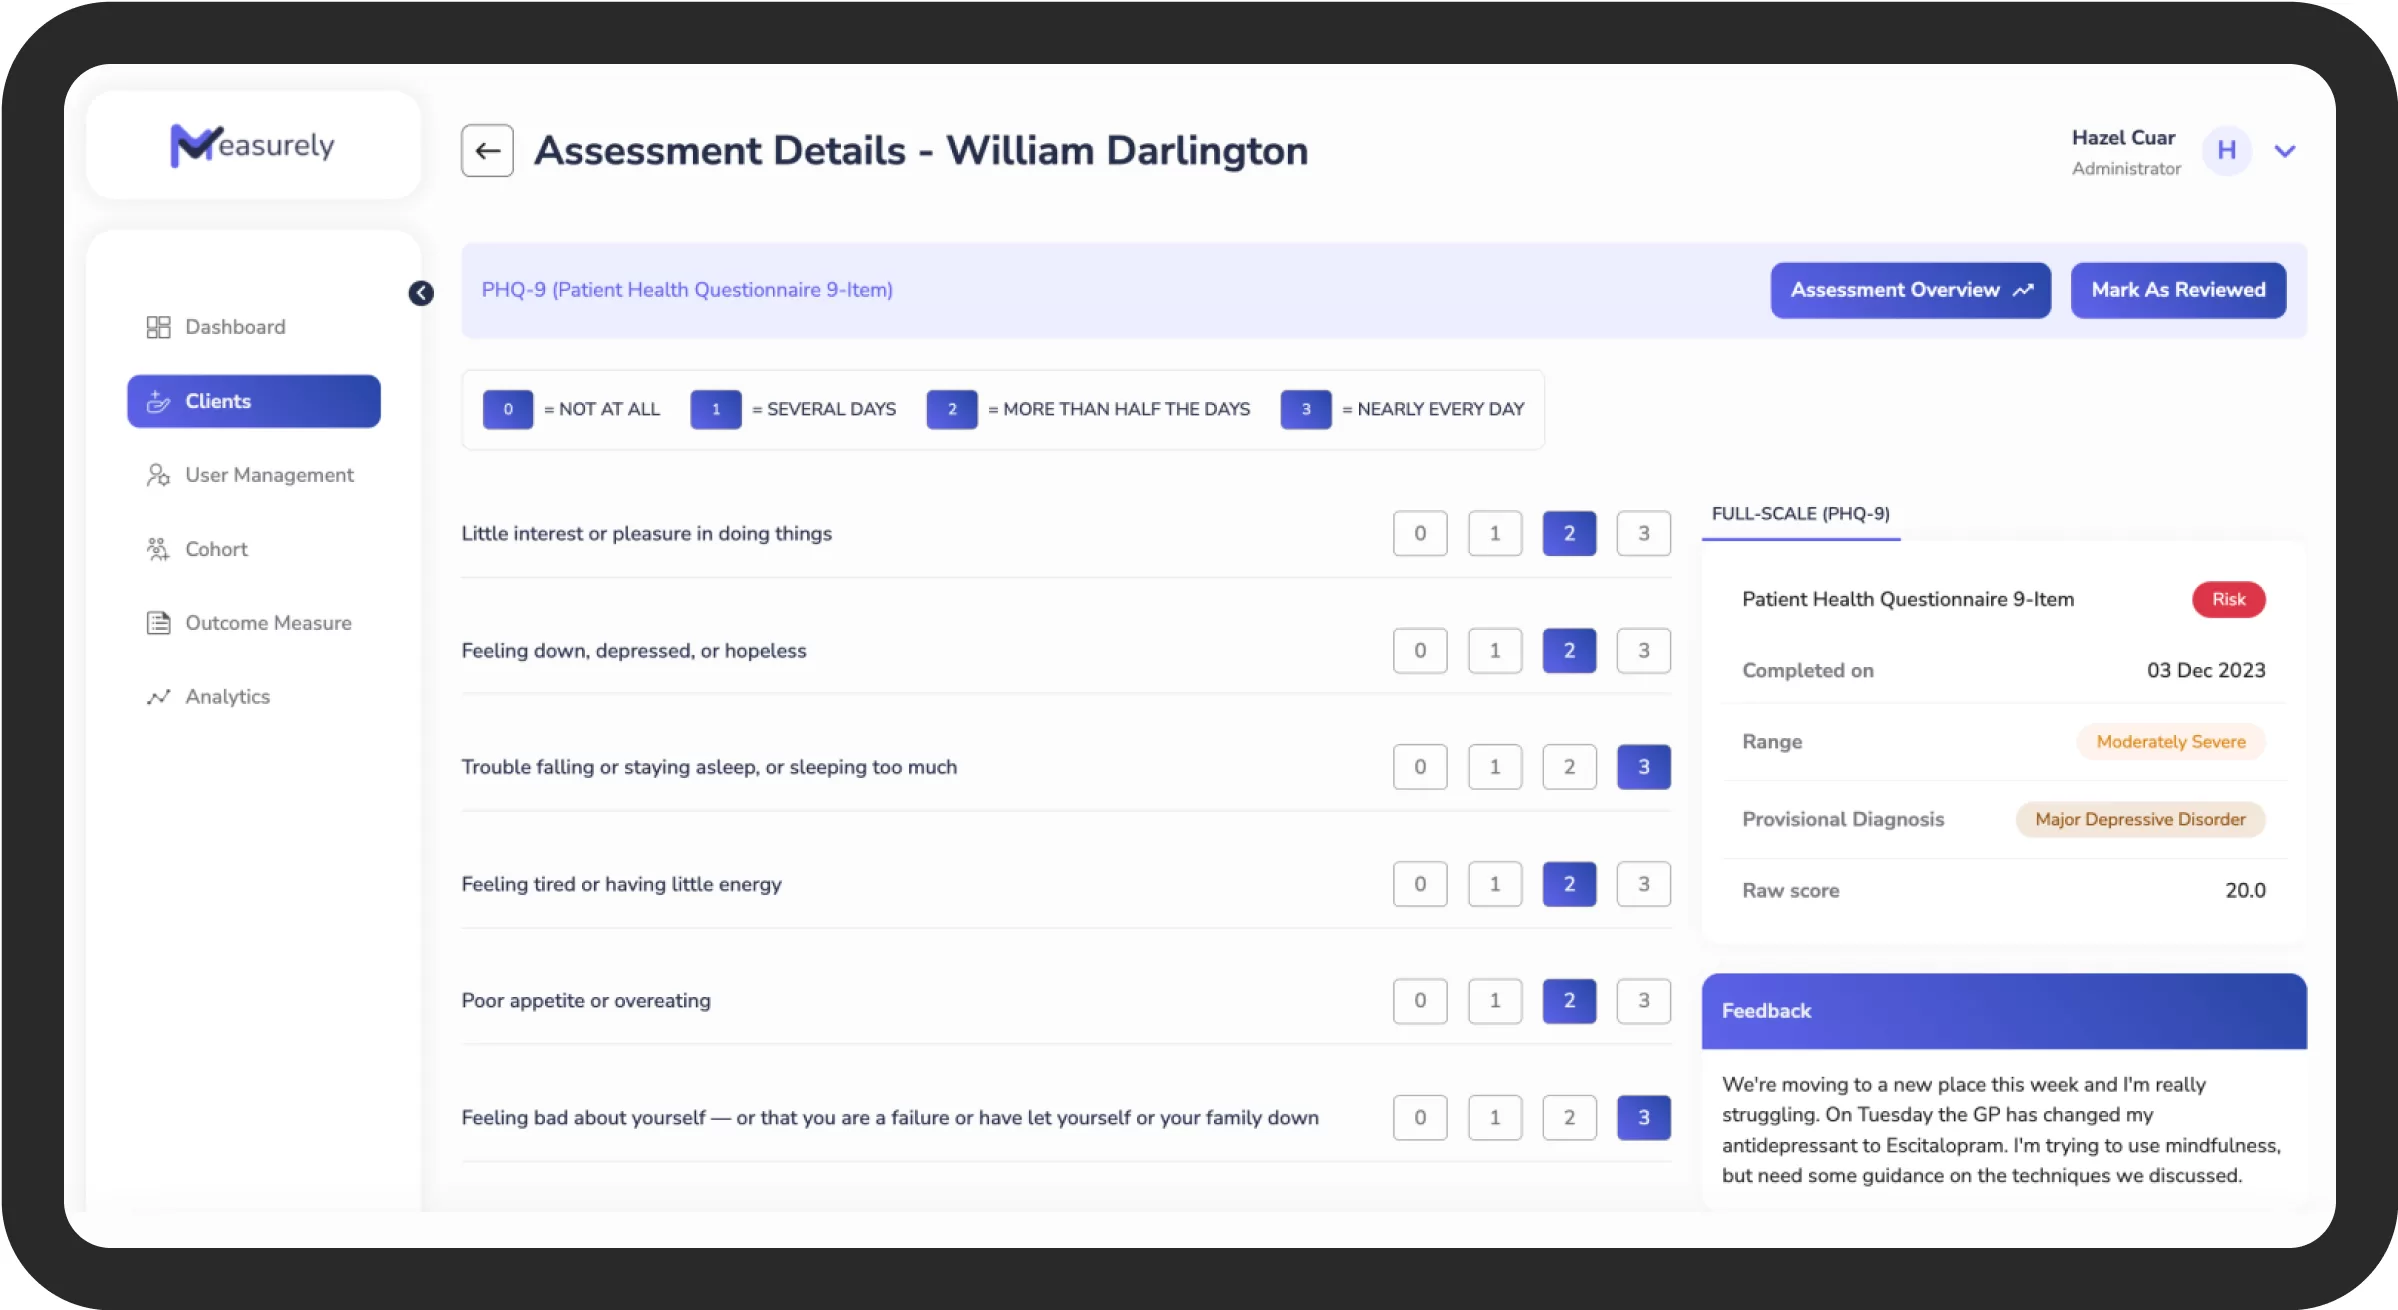 Screenshot of a digital health platform called 'Measurely' displaying an assessment detail page for a patient named William Darlington. The page shows a completed Patient Health Questionnaire-9 (PHQ-9) with selections indicating a moderately severe range and a provisional diagnosis of Major Depressive Disorder. The feedback section includes a personal note about the patient's current life situation and a mention of a change in medication to Escitalopram.